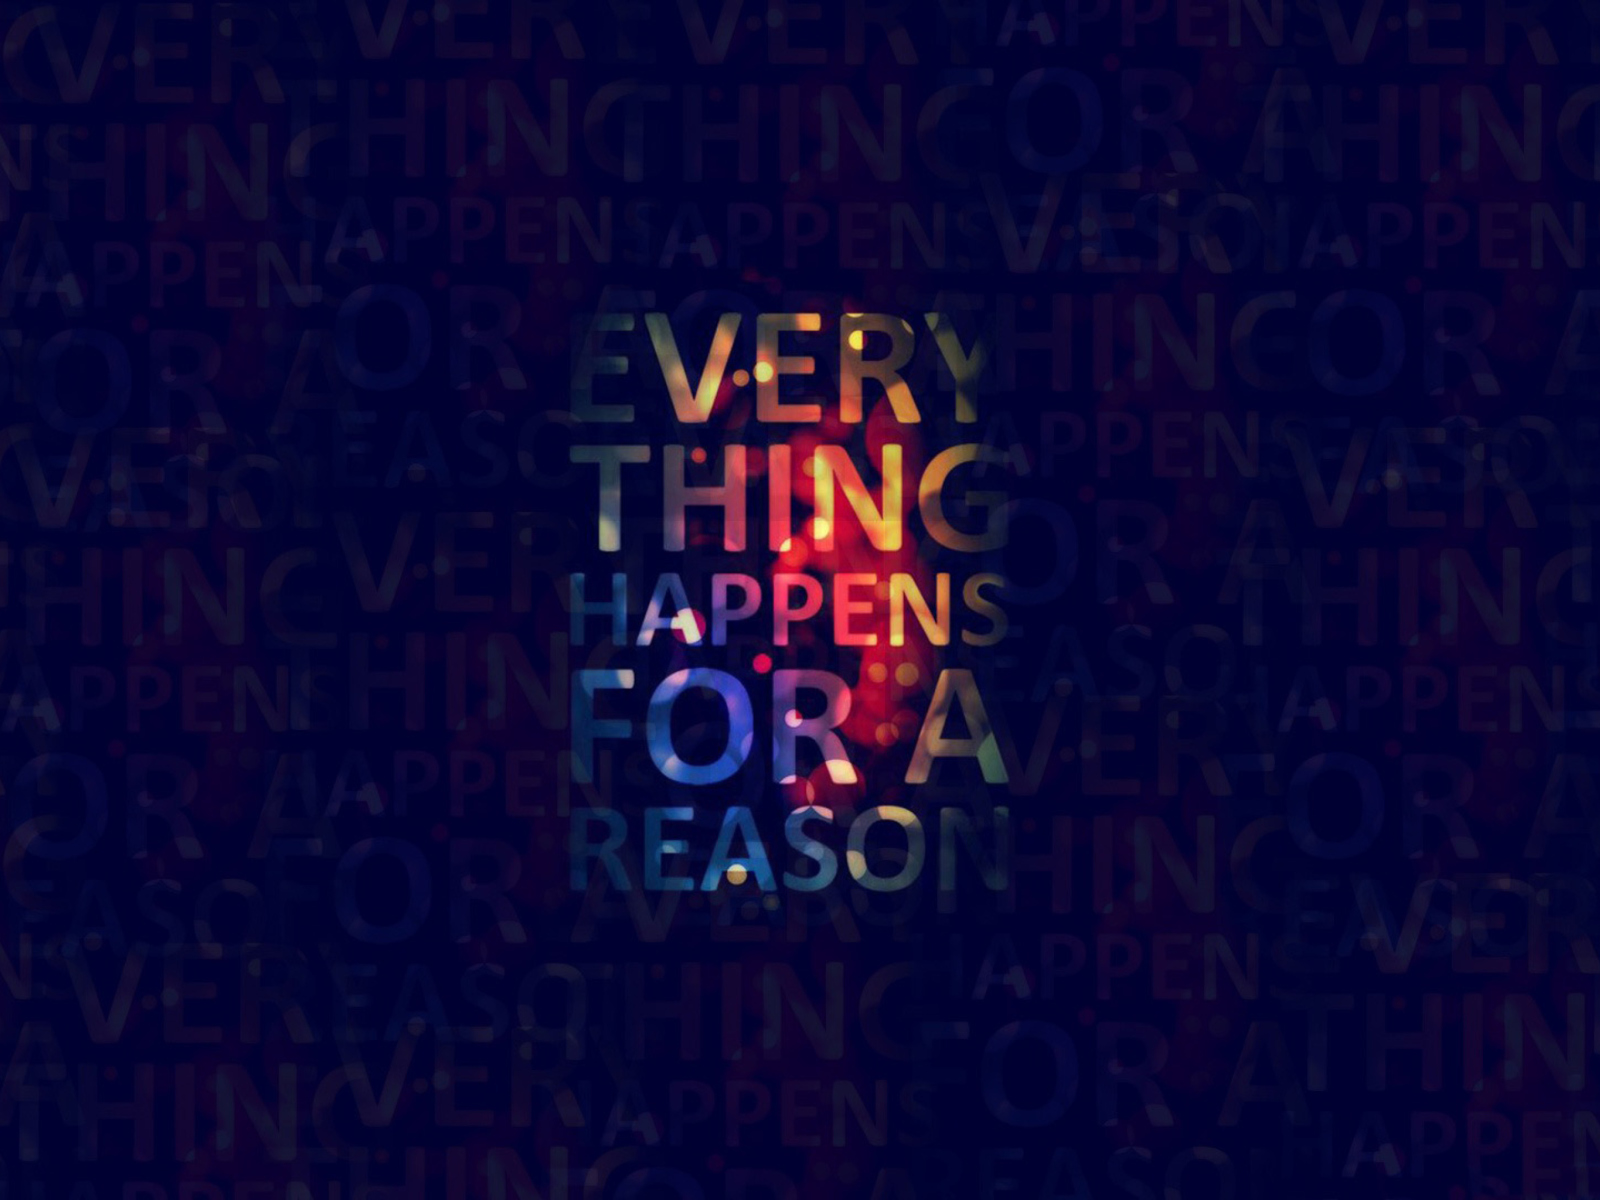 Everything Happens For A Reason wallpaper 1600x1200